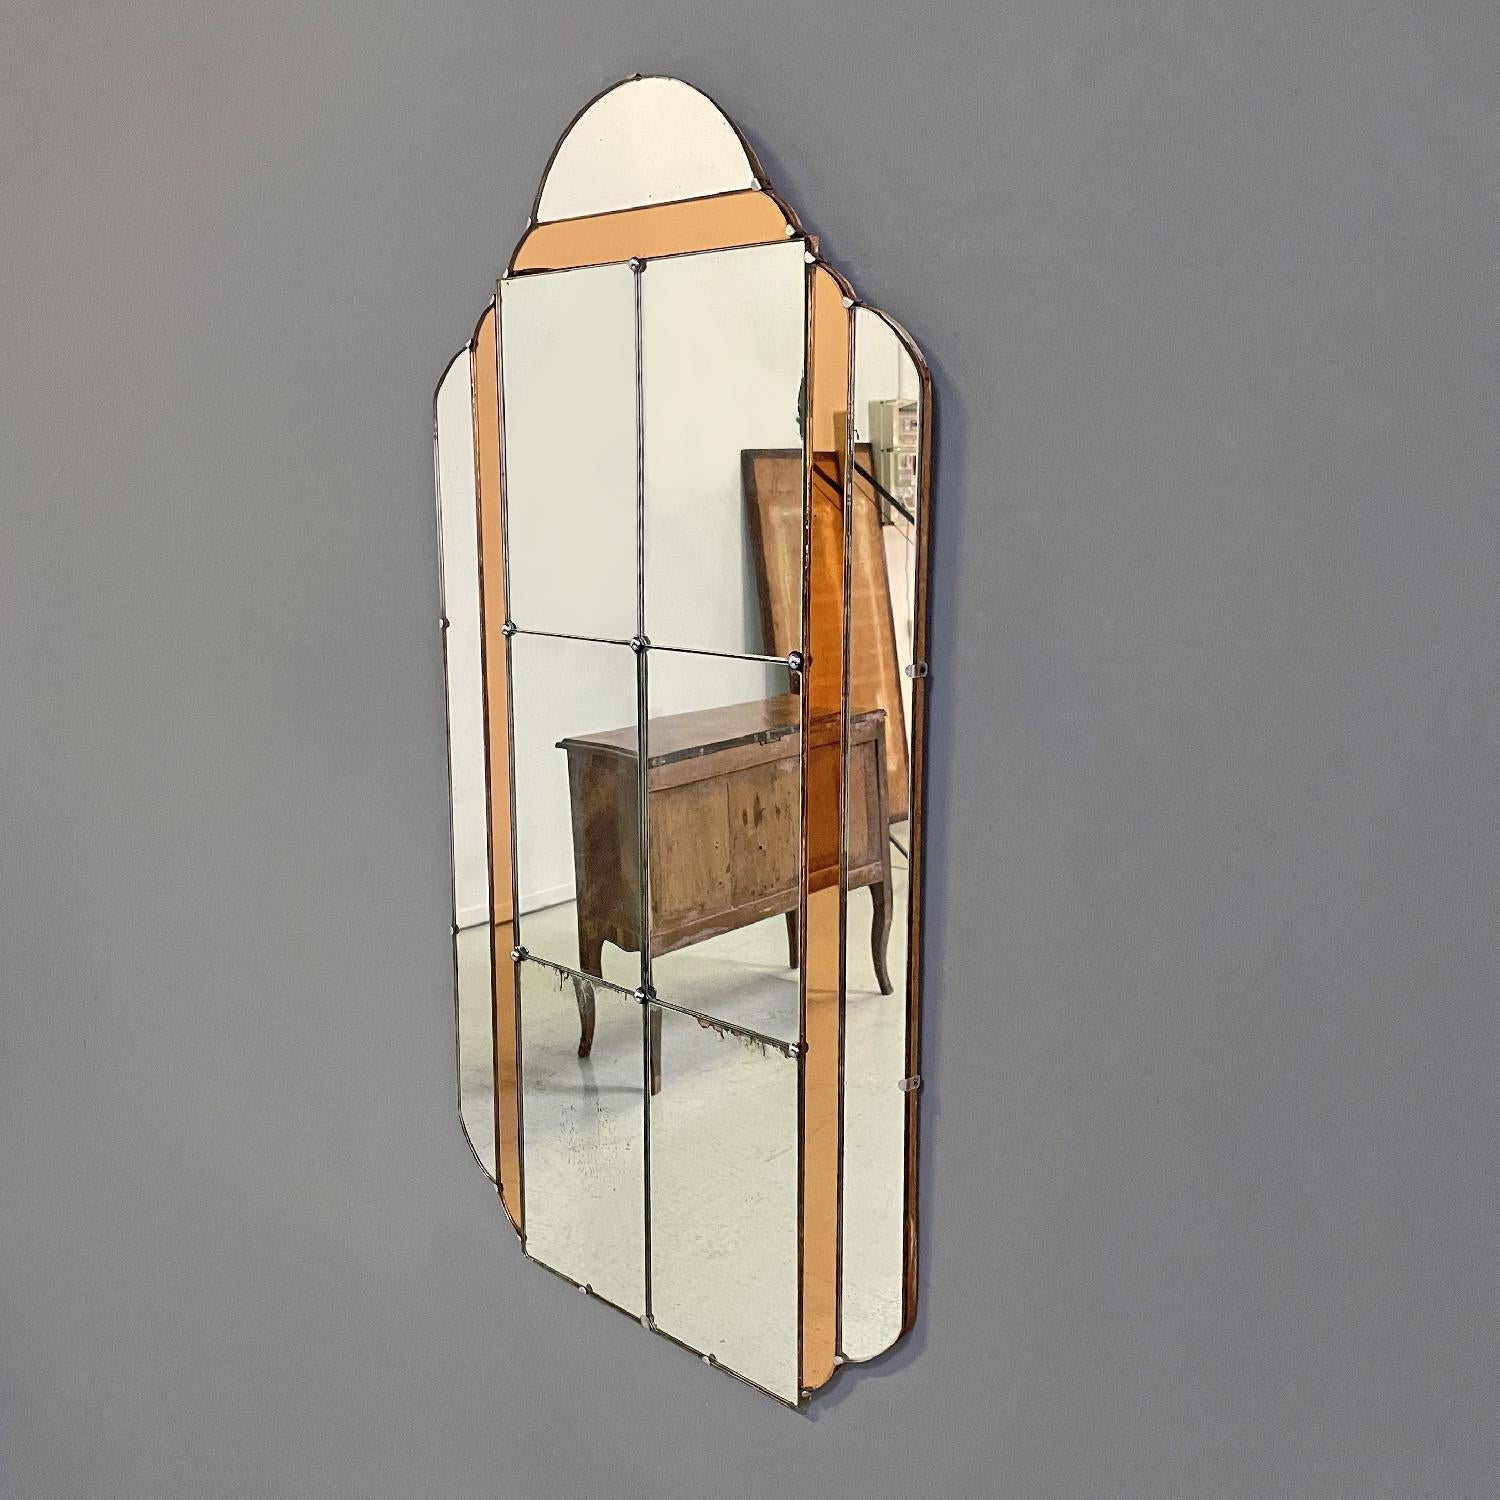 Italian Art Deco wall mirror with peach colored parts, 1930s
Rectangular Art Decò wall mirror with rounded profiles. The mirror is composed of several mirrors joined together by small hemispherical parts in silver metal. In the upper part the